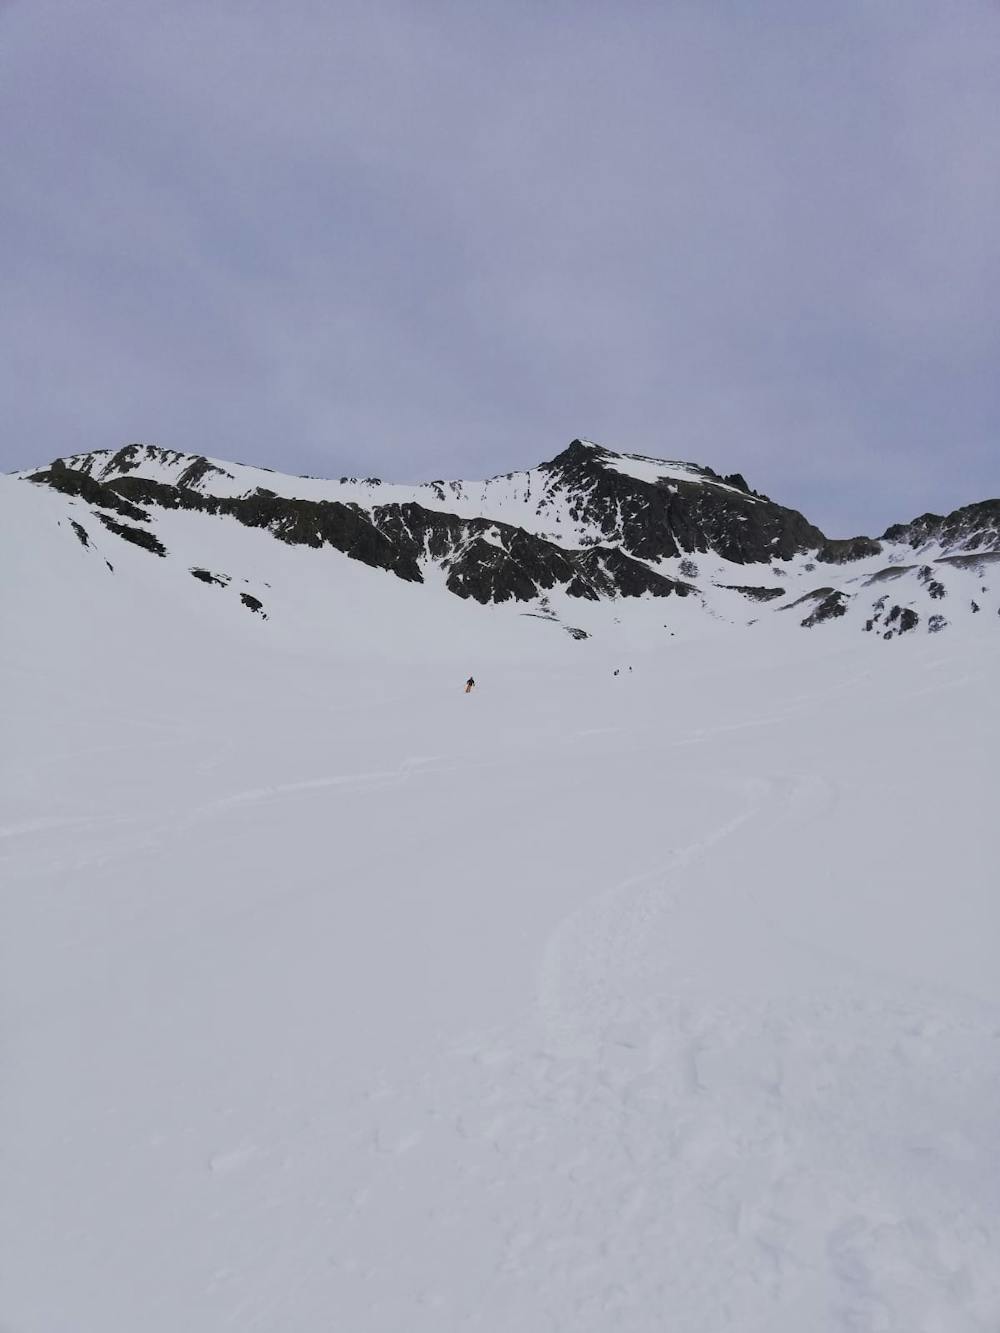 Looking back up at the upper section of the route, with a skier coming down.